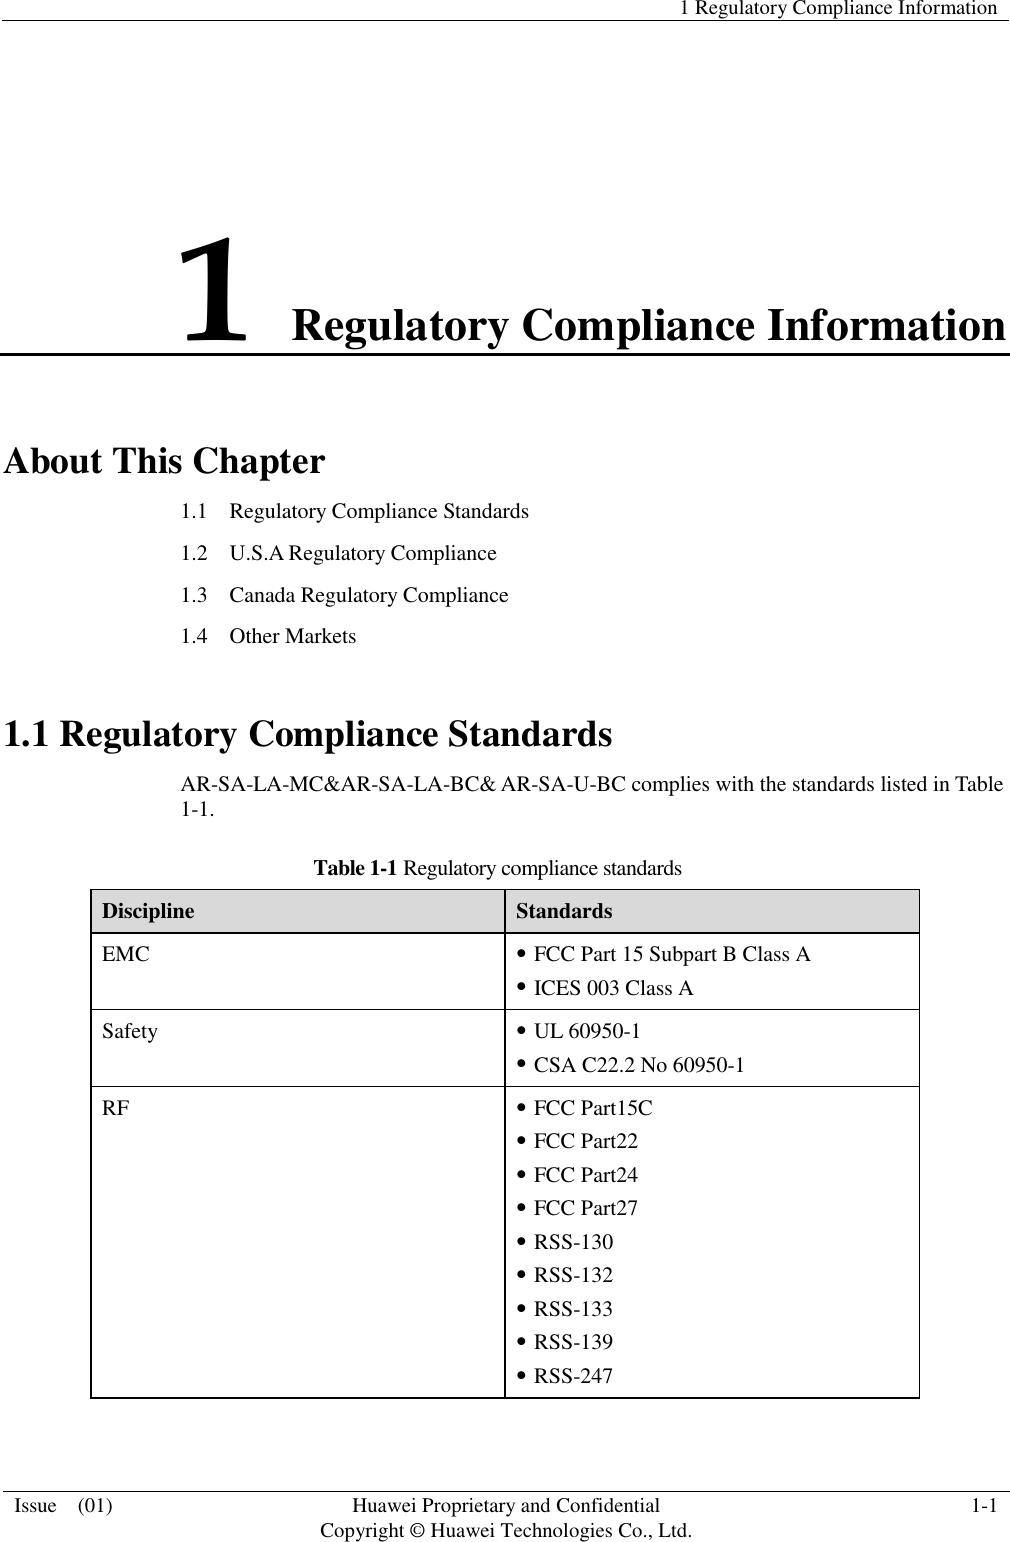   1 Regulatory Compliance Information  Issue    (01) Huawei Proprietary and Confidential                                     Copyright © Huawei Technologies Co., Ltd. 1-1  1 Regulatory Compliance Information About This Chapter 1.1    Regulatory Compliance Standards 1.2  U.S.A Regulatory Compliance 1.3    Canada Regulatory Compliance 1.4  Other Markets 1.1 Regulatory Compliance Standards AR-SA-LA-MC&amp;AR-SA-LA-BC&amp; AR-SA-U-BC complies with the standards listed in Table 1-1. Table 1-1 Regulatory compliance standards Discipline Standards EMC  FCC Part 15 Subpart B Class A  ICES 003 Class A Safety  UL 60950-1  CSA C22.2 No 60950-1 RF  FCC Part15C  FCC Part22  FCC Part24  FCC Part27  RSS-130  RSS-132  RSS-133  RSS-139  RSS-247 